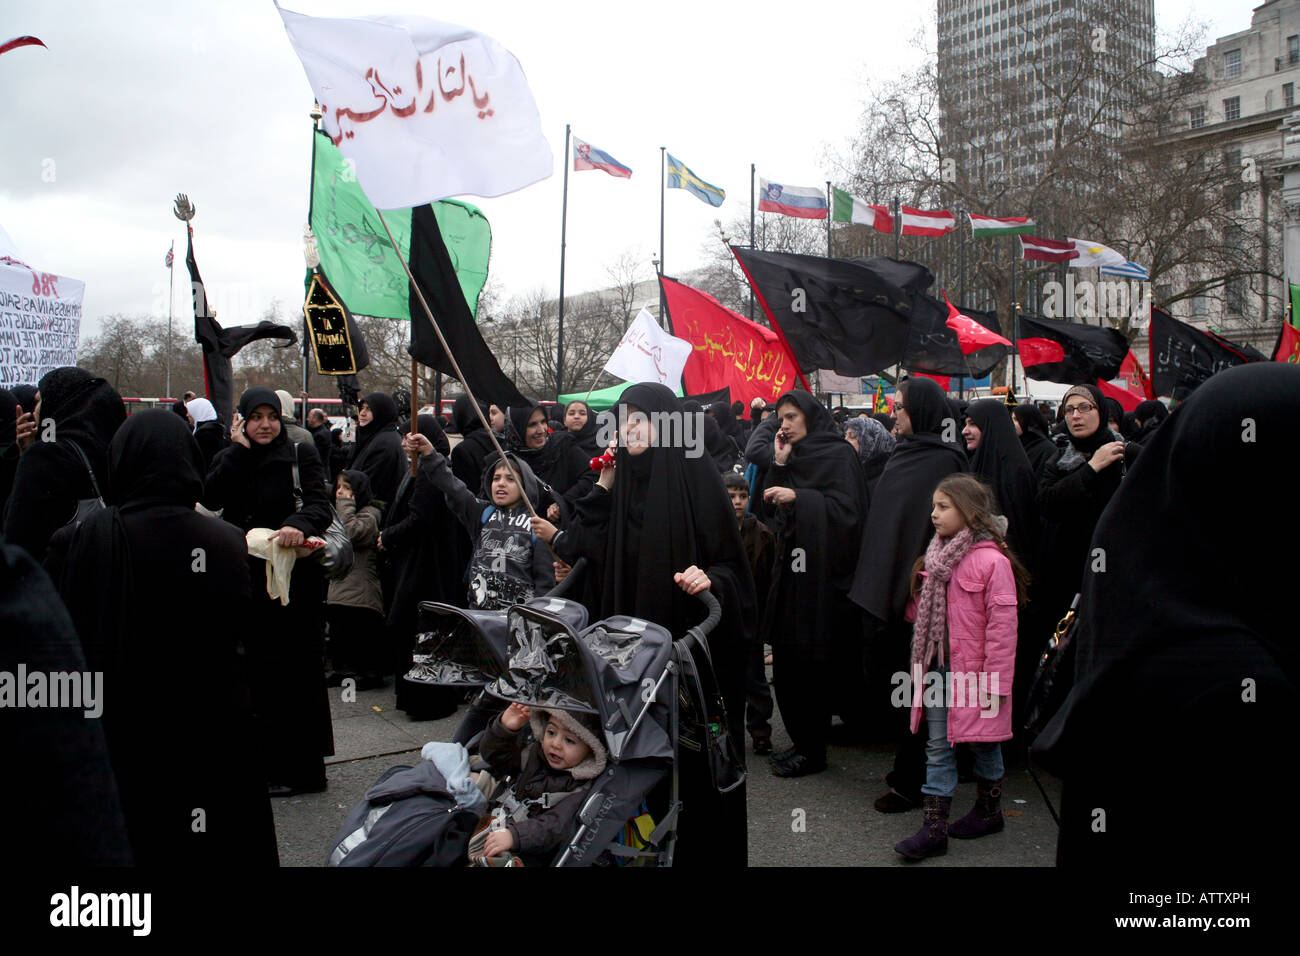 Muslim women and children marching in London in honour of Shia martyr Imam Hussain Stock Photo